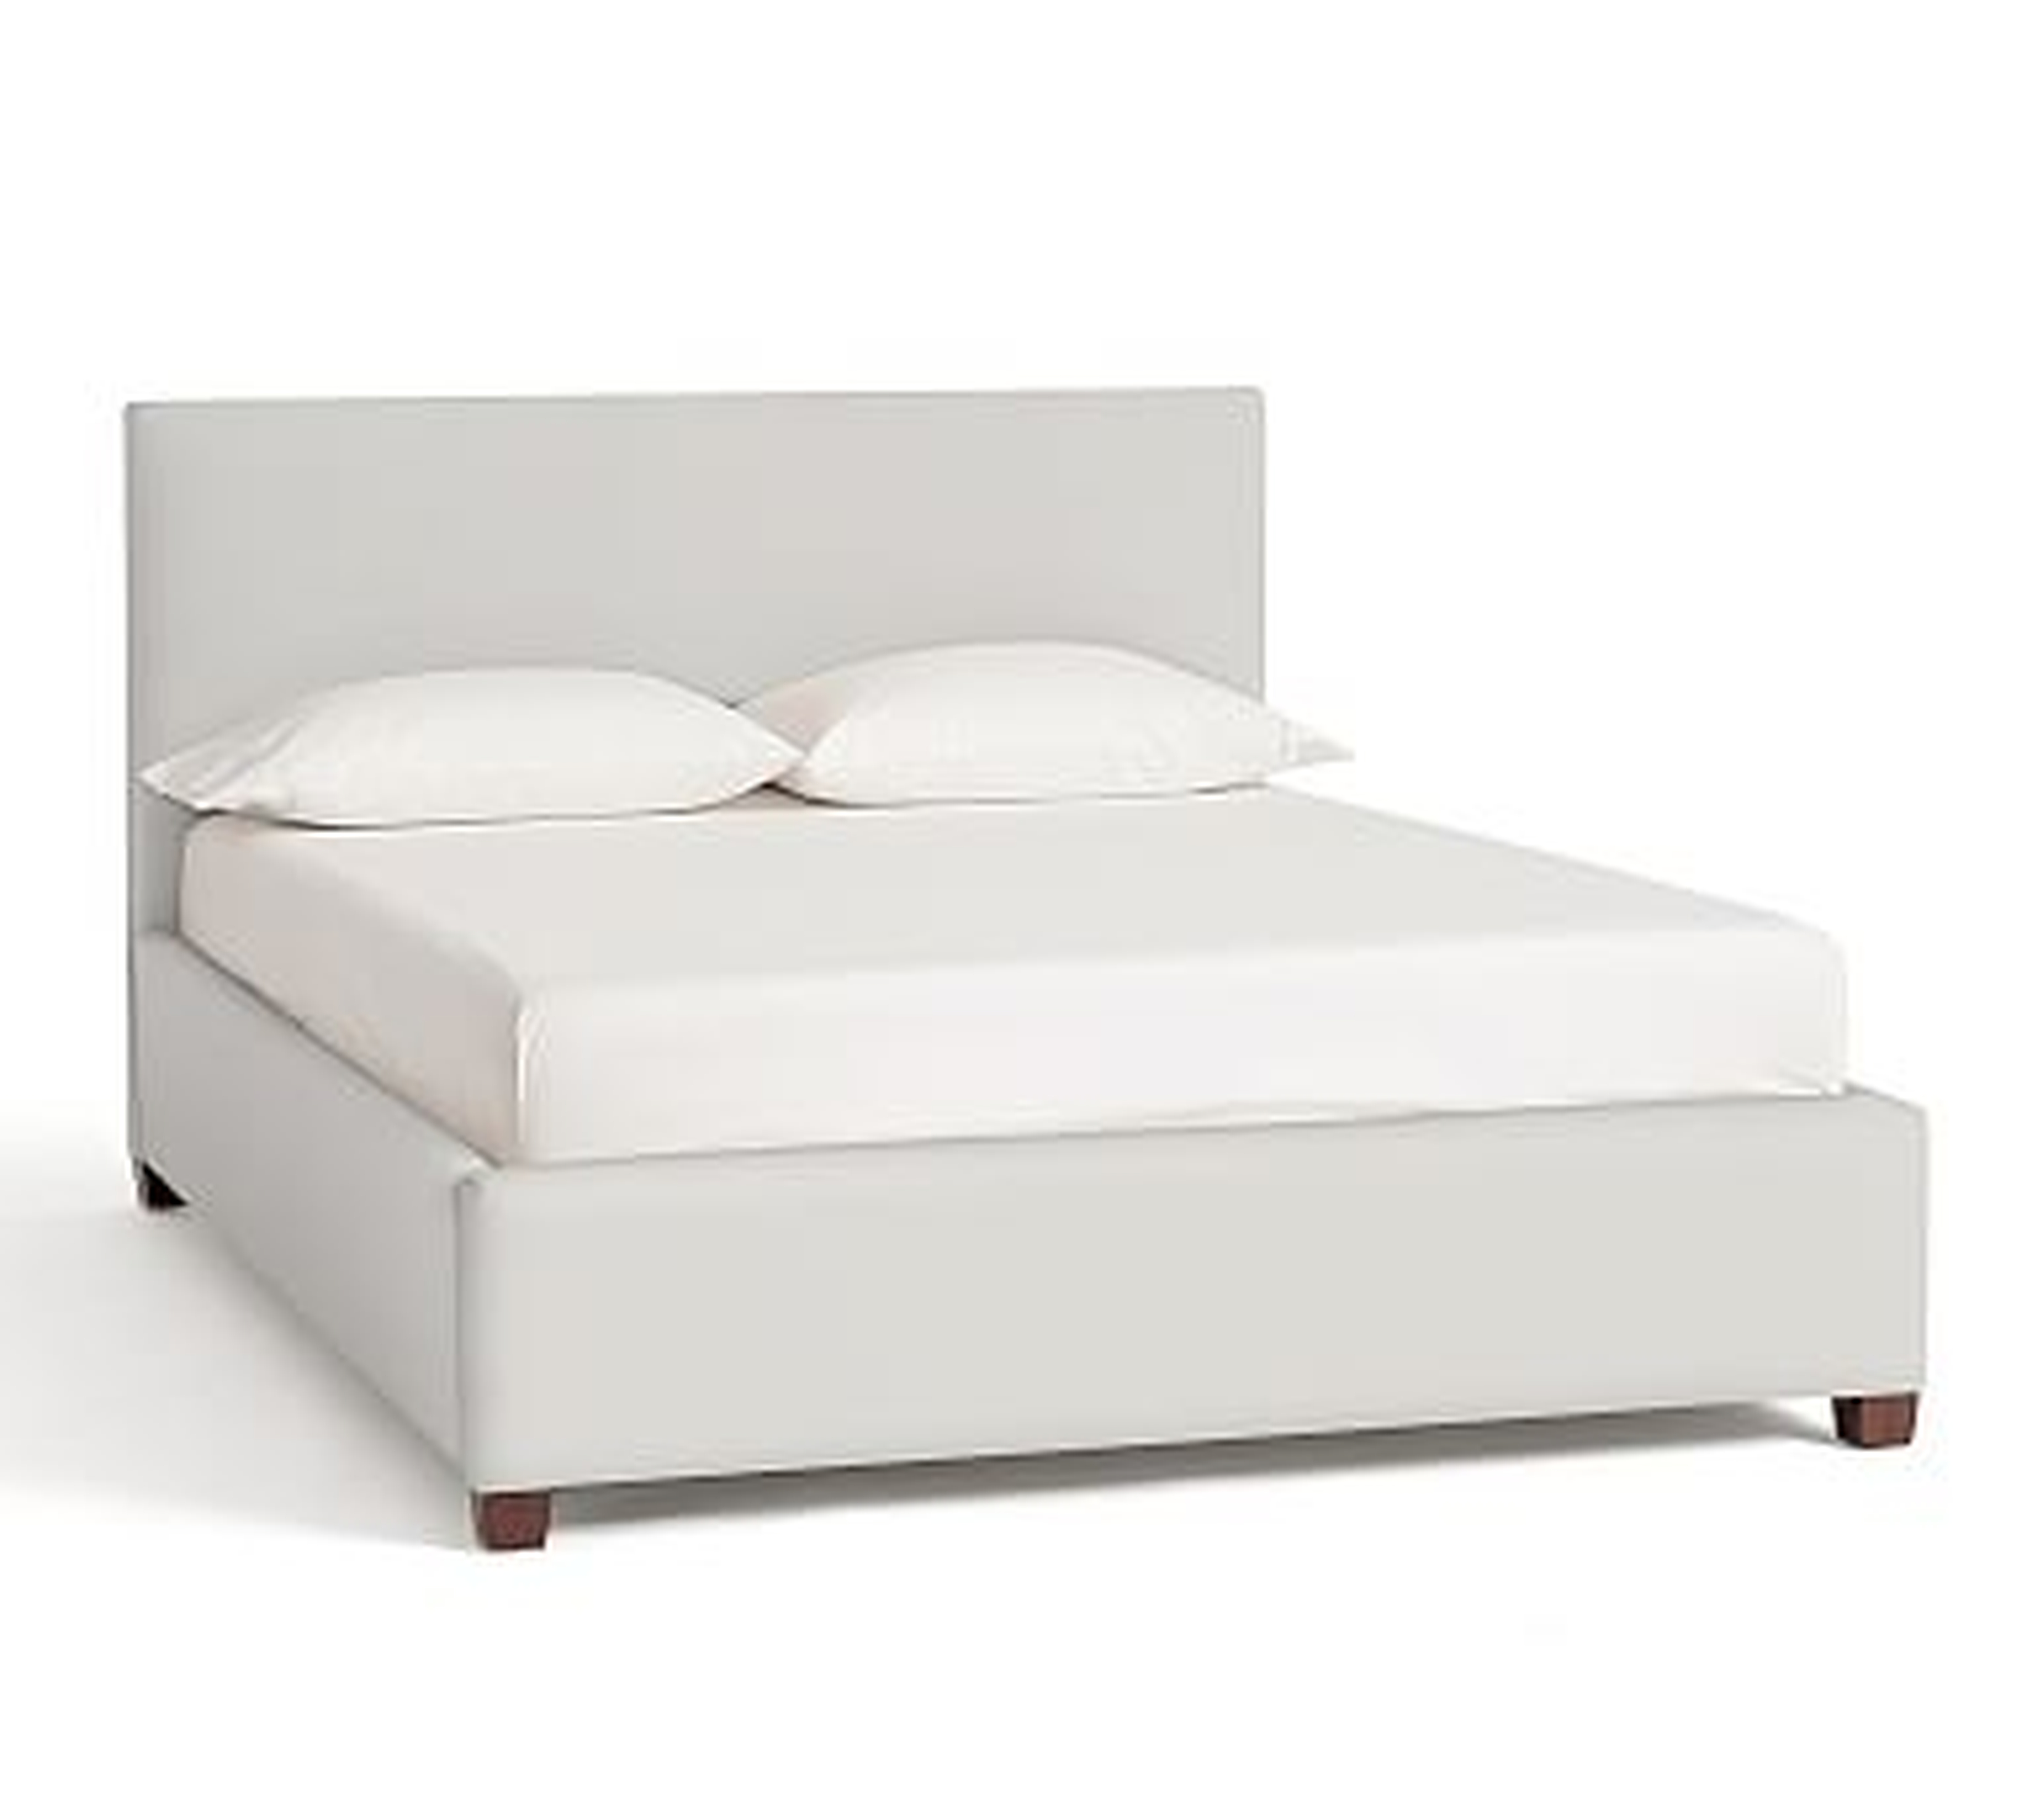 Raleigh Square Upholstered Bed without Nailheads, King, Low Headboard 43.5"h, Sunbrella(R) Performance Slub Tweed White - Pottery Barn